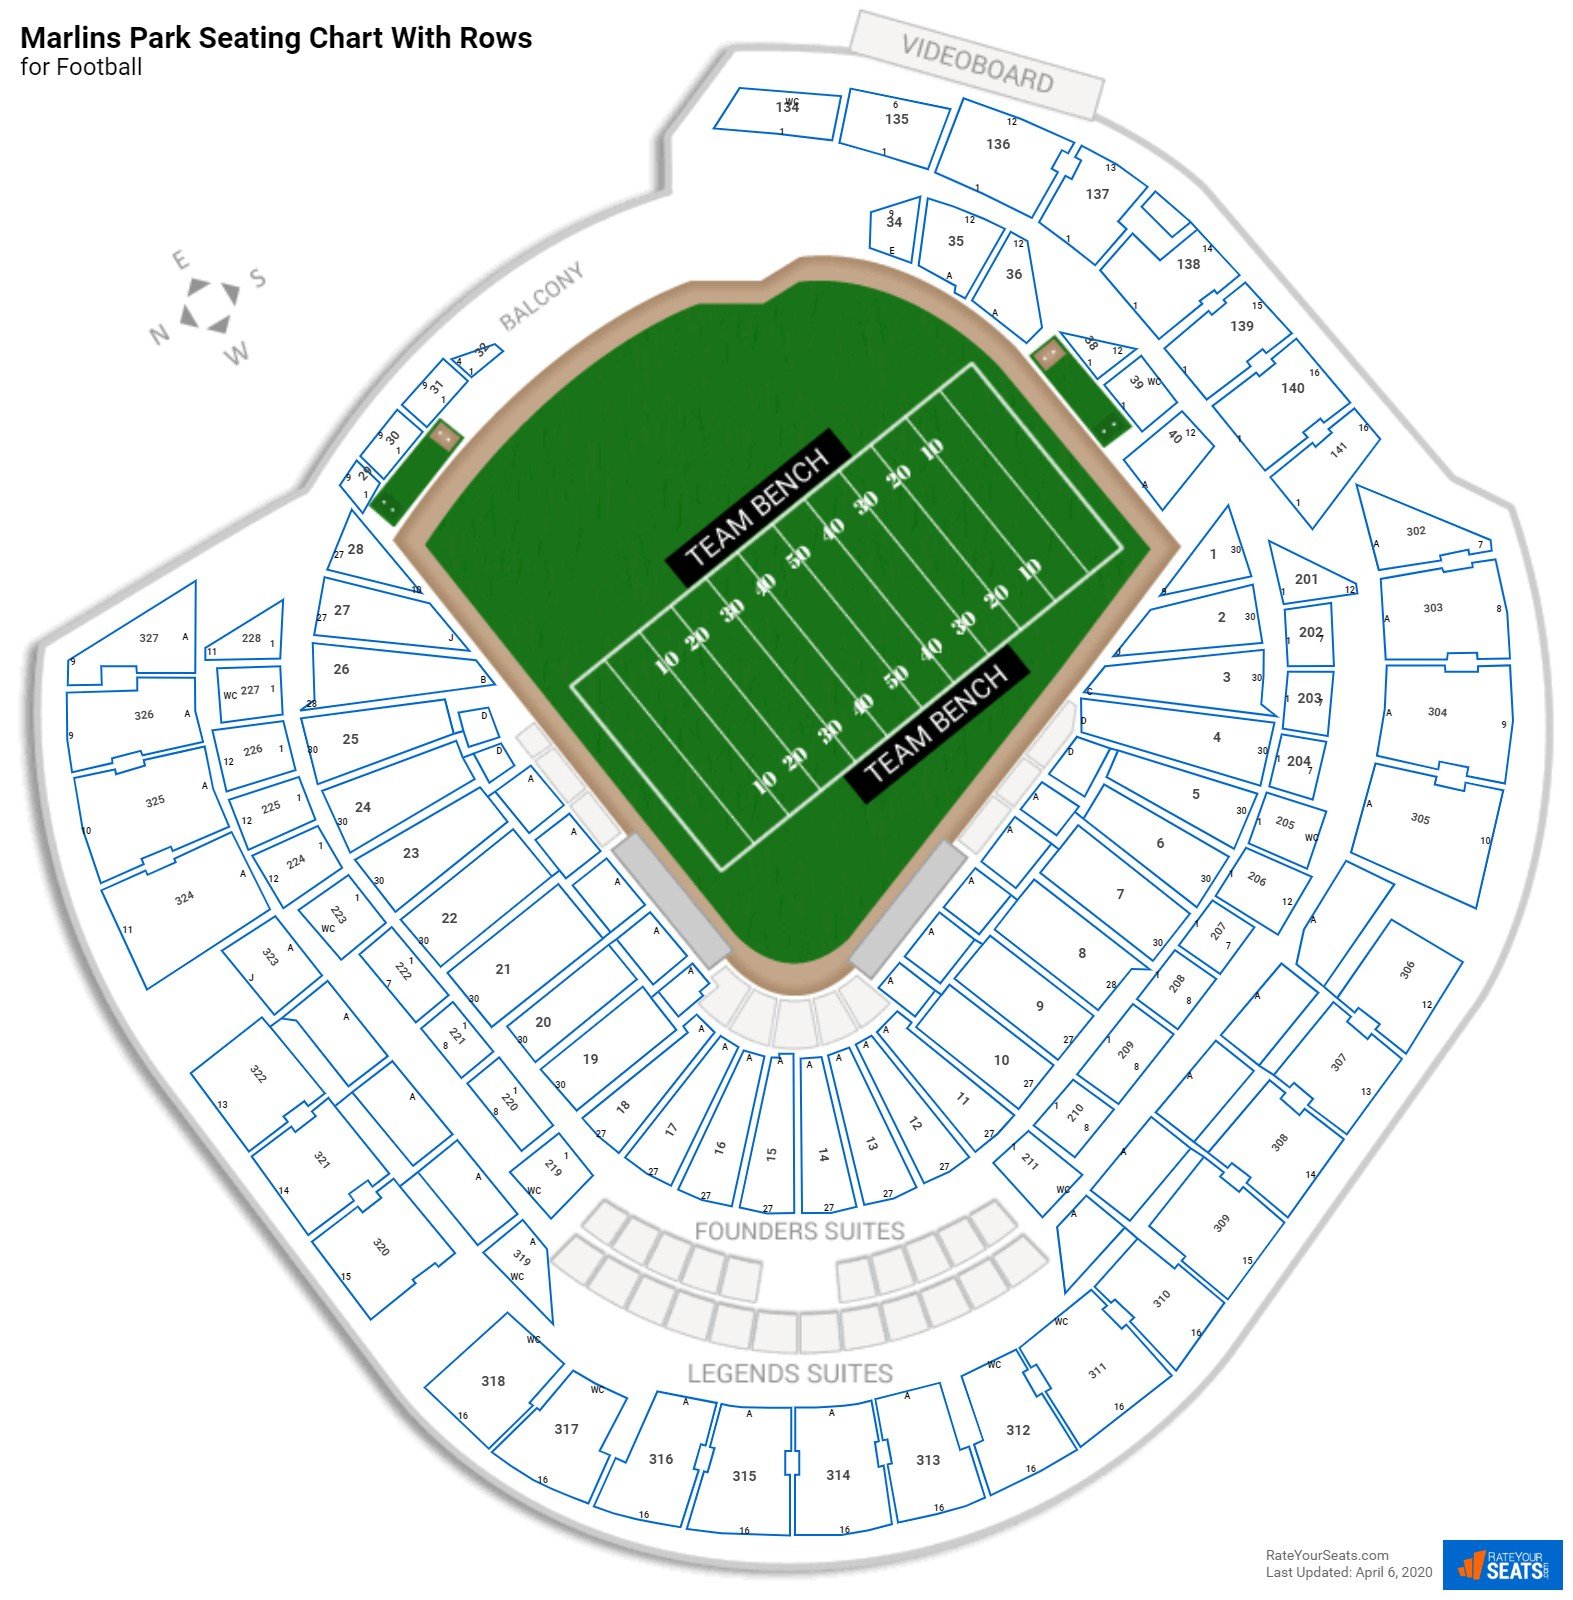 Marlins Park Seating Charts for Football